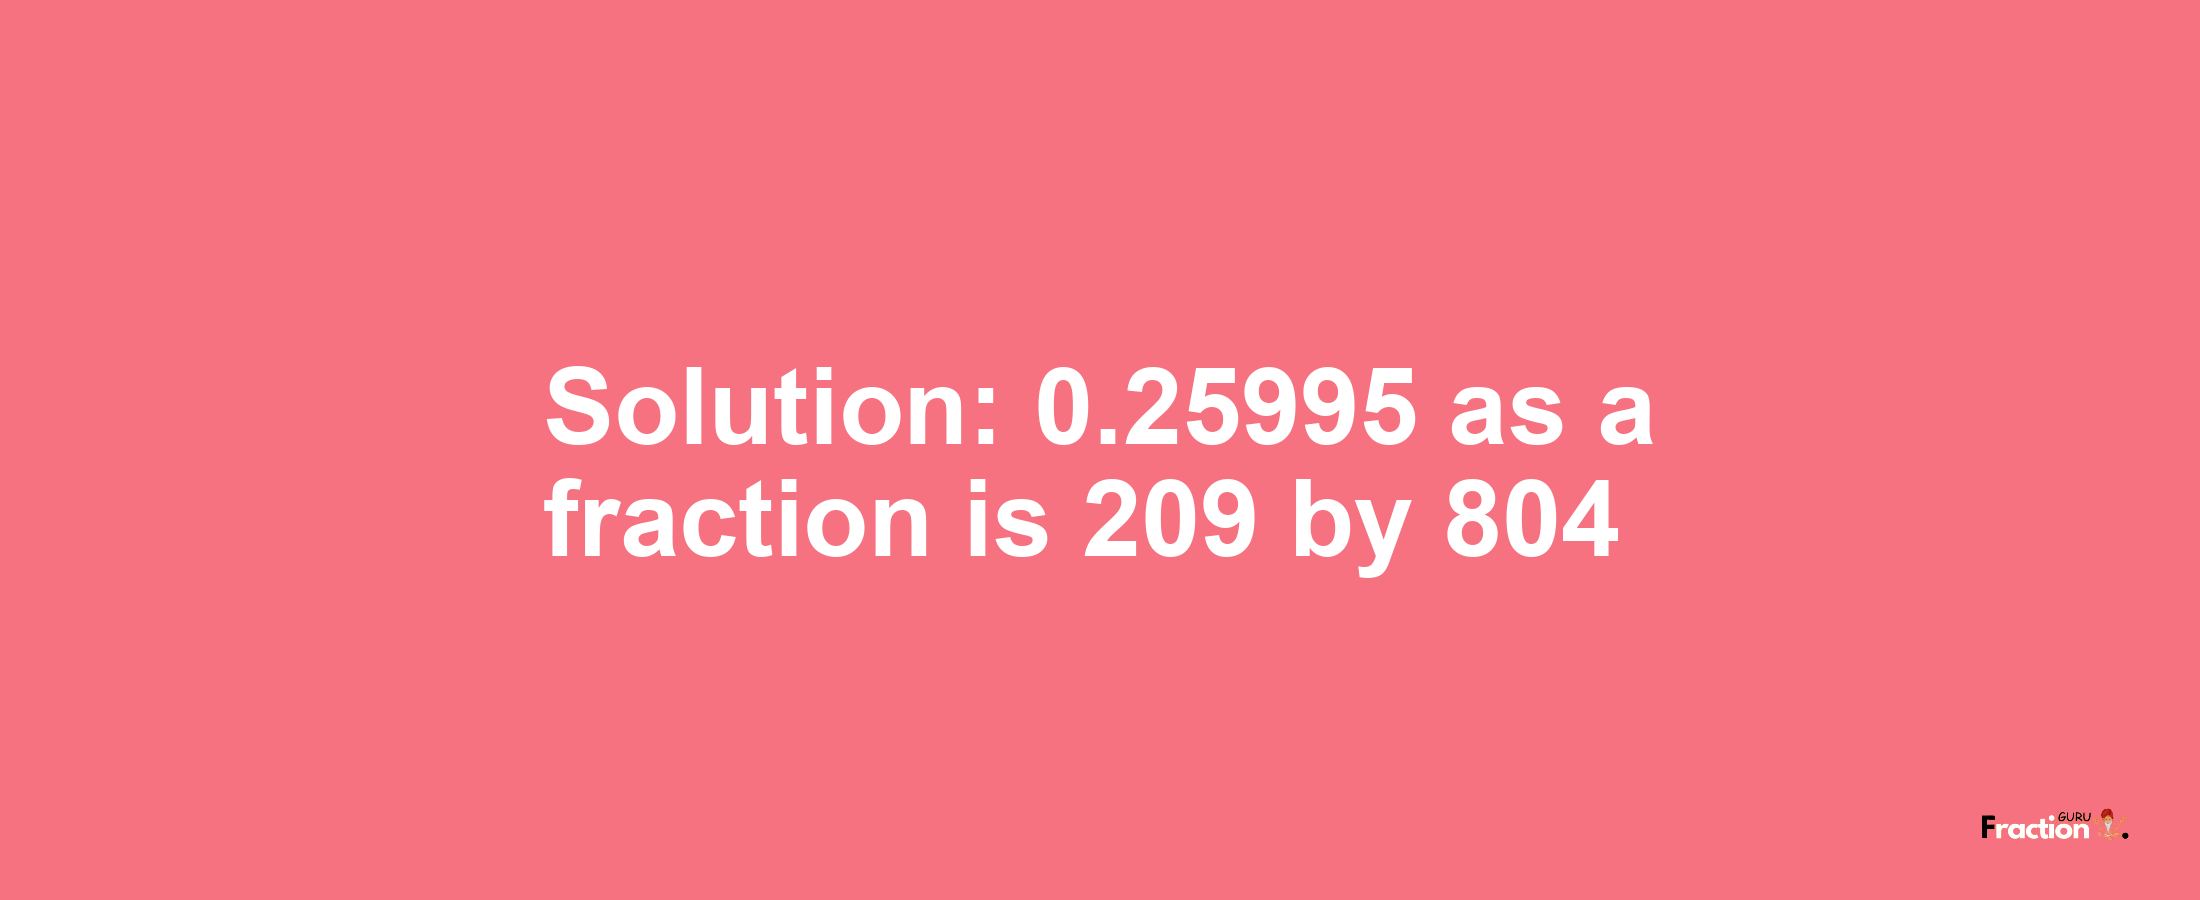 Solution:0.25995 as a fraction is 209/804